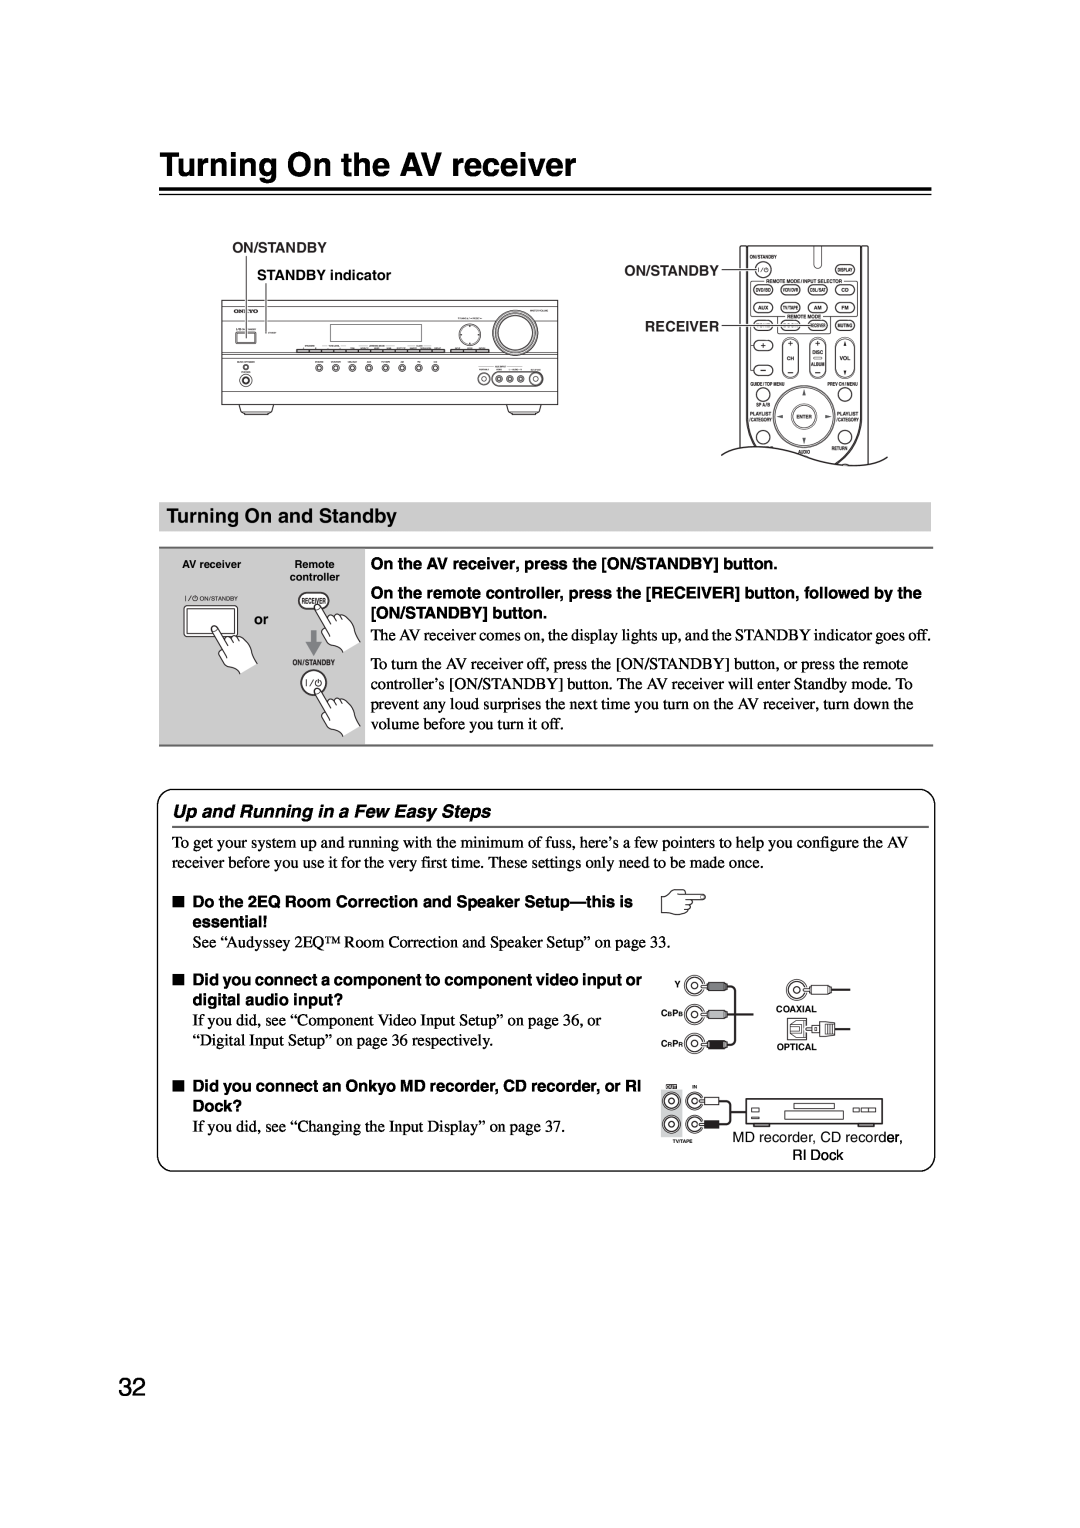 Onkyo TXSR307 instruction manual Turning On the AV receiver, Turning On and Standby, Up and Running in a Few Easy Steps 